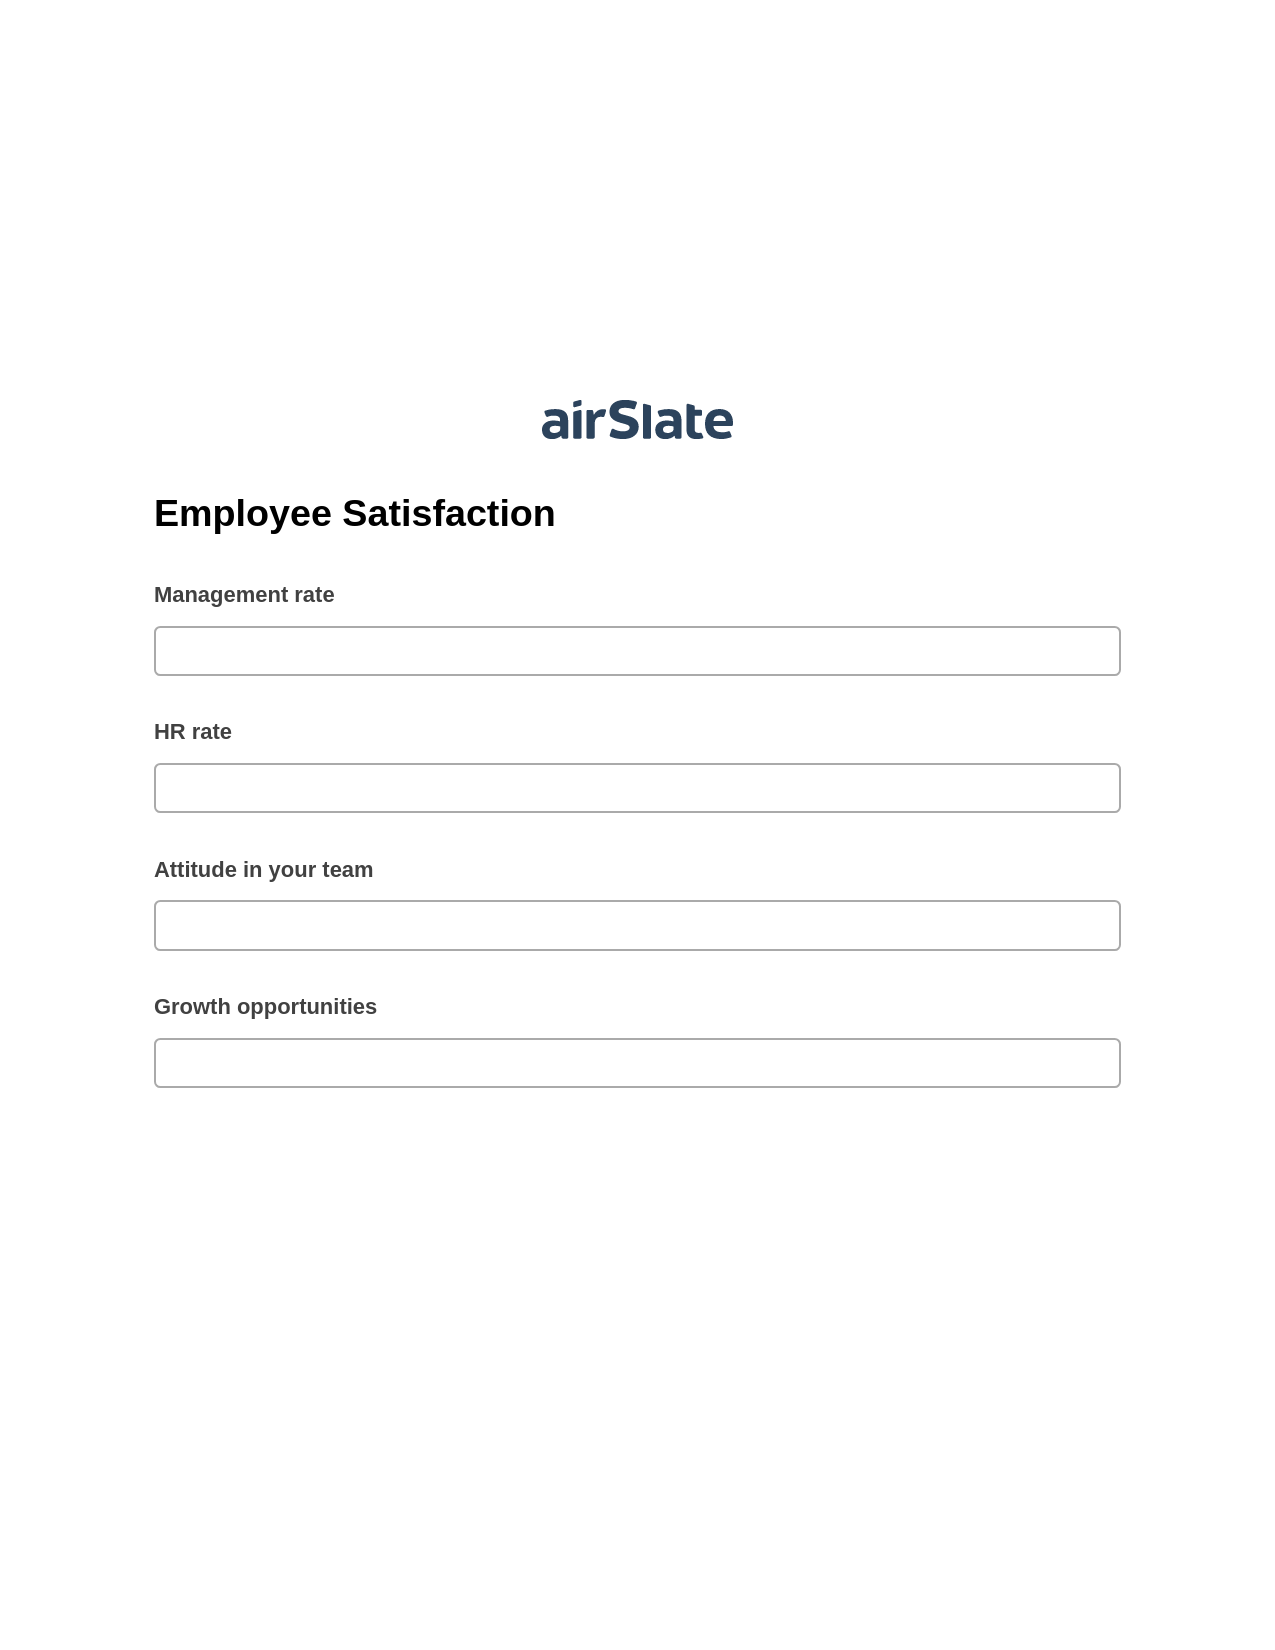 Employee Satisfaction Pre-fill from Excel Spreadsheet Bot, Text Message Notification Bot, Email Notification Postfinish Bot